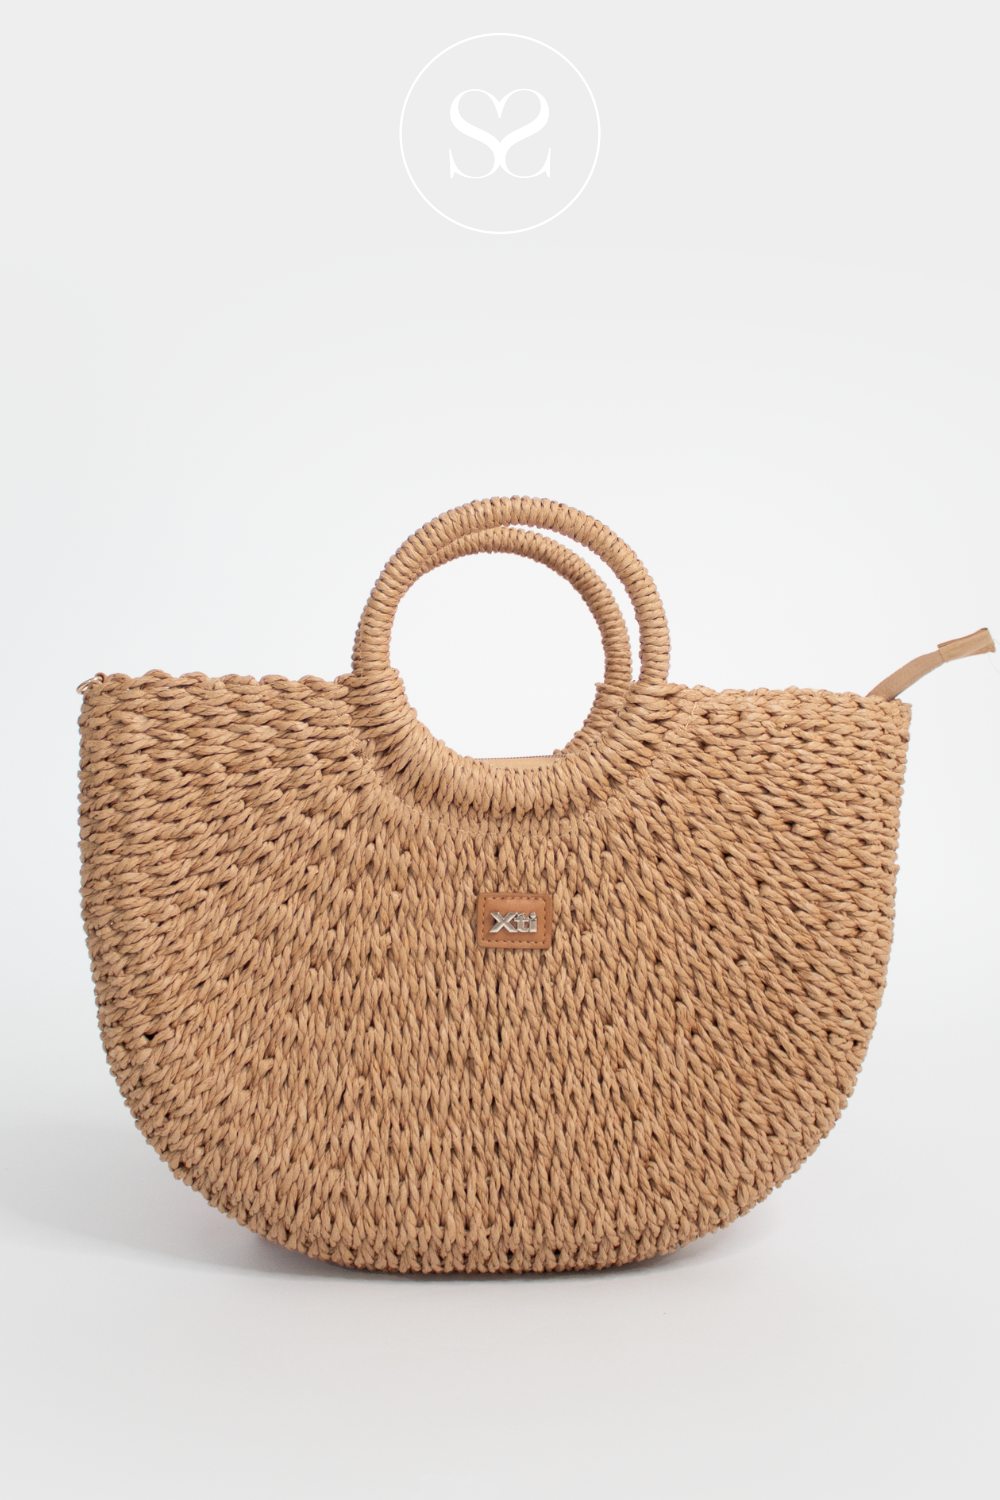 Woven straw bag from XTI